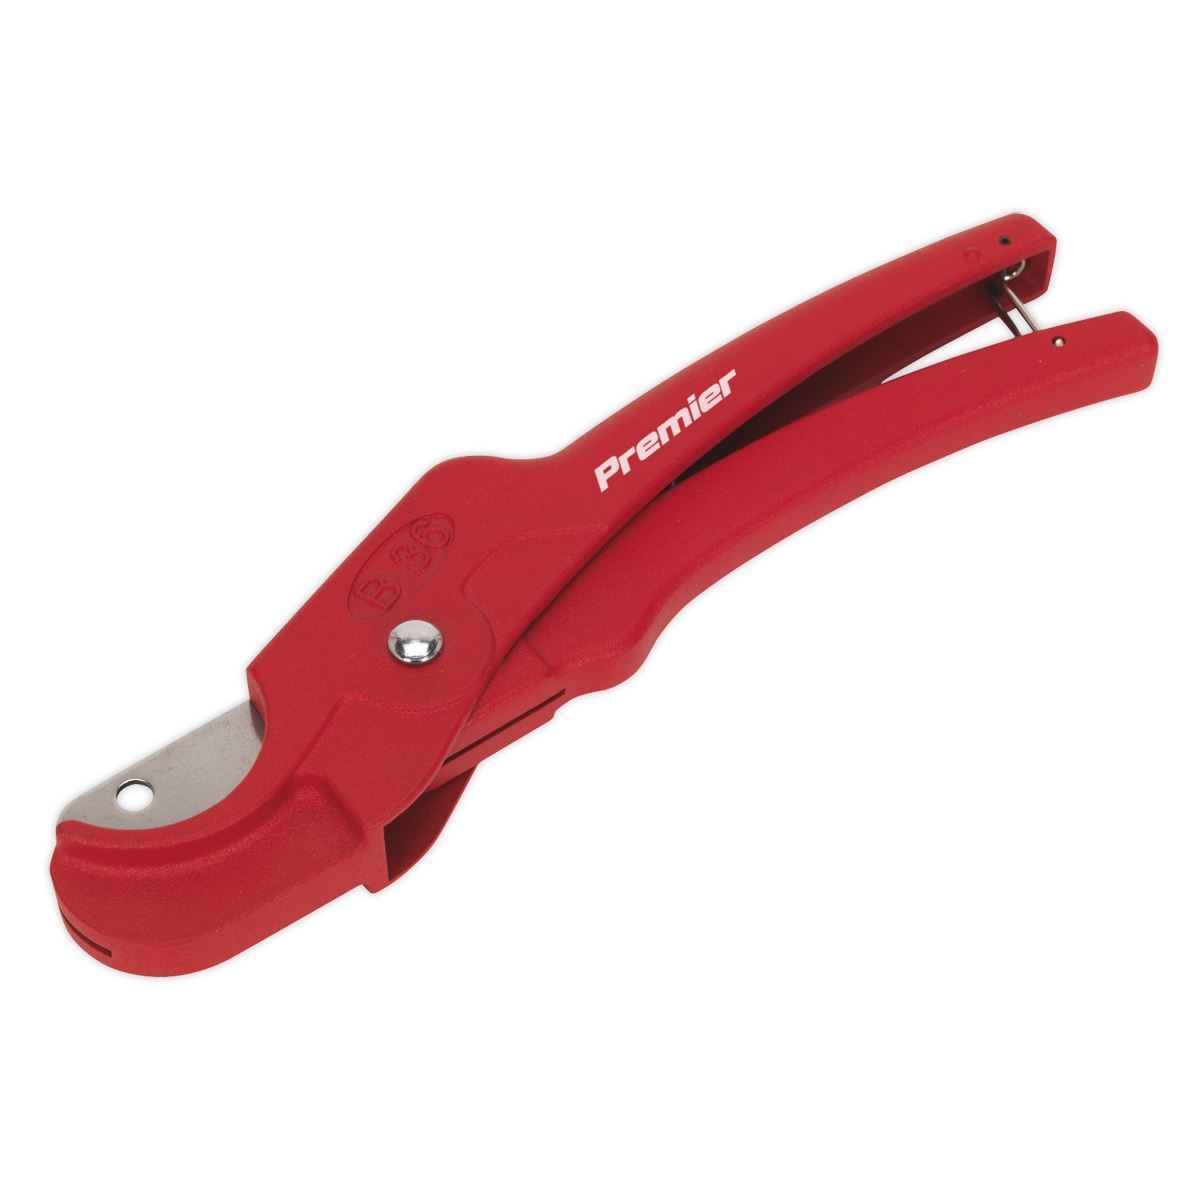 Sealey Premier 3-26mm Diameter Rubber and Reinforced Hose Cutter Pipe Pliers